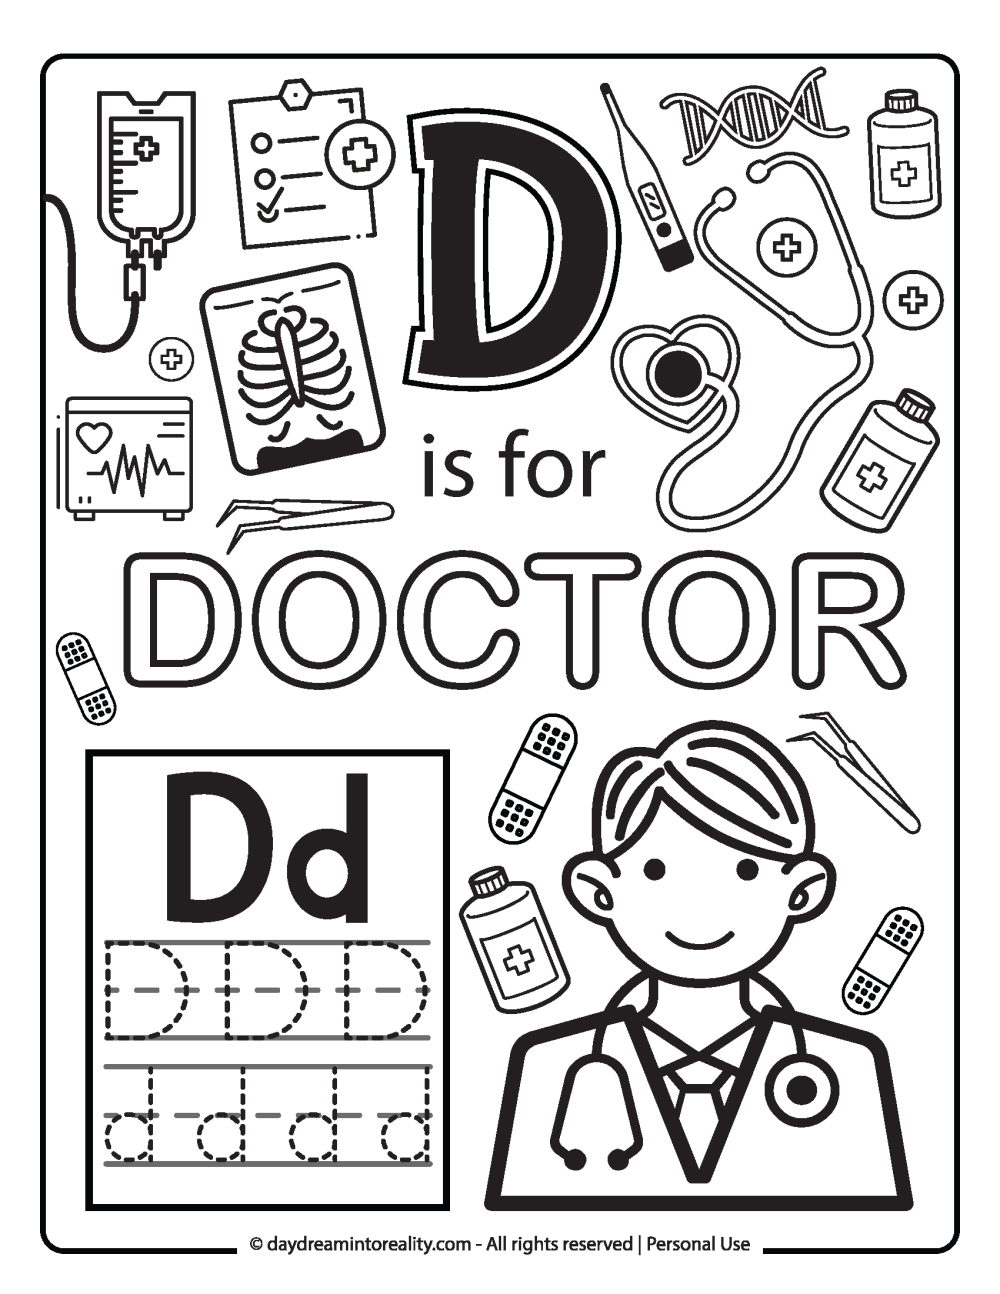 Letter D worksheet free printables. . Coloring page D is for doctor.